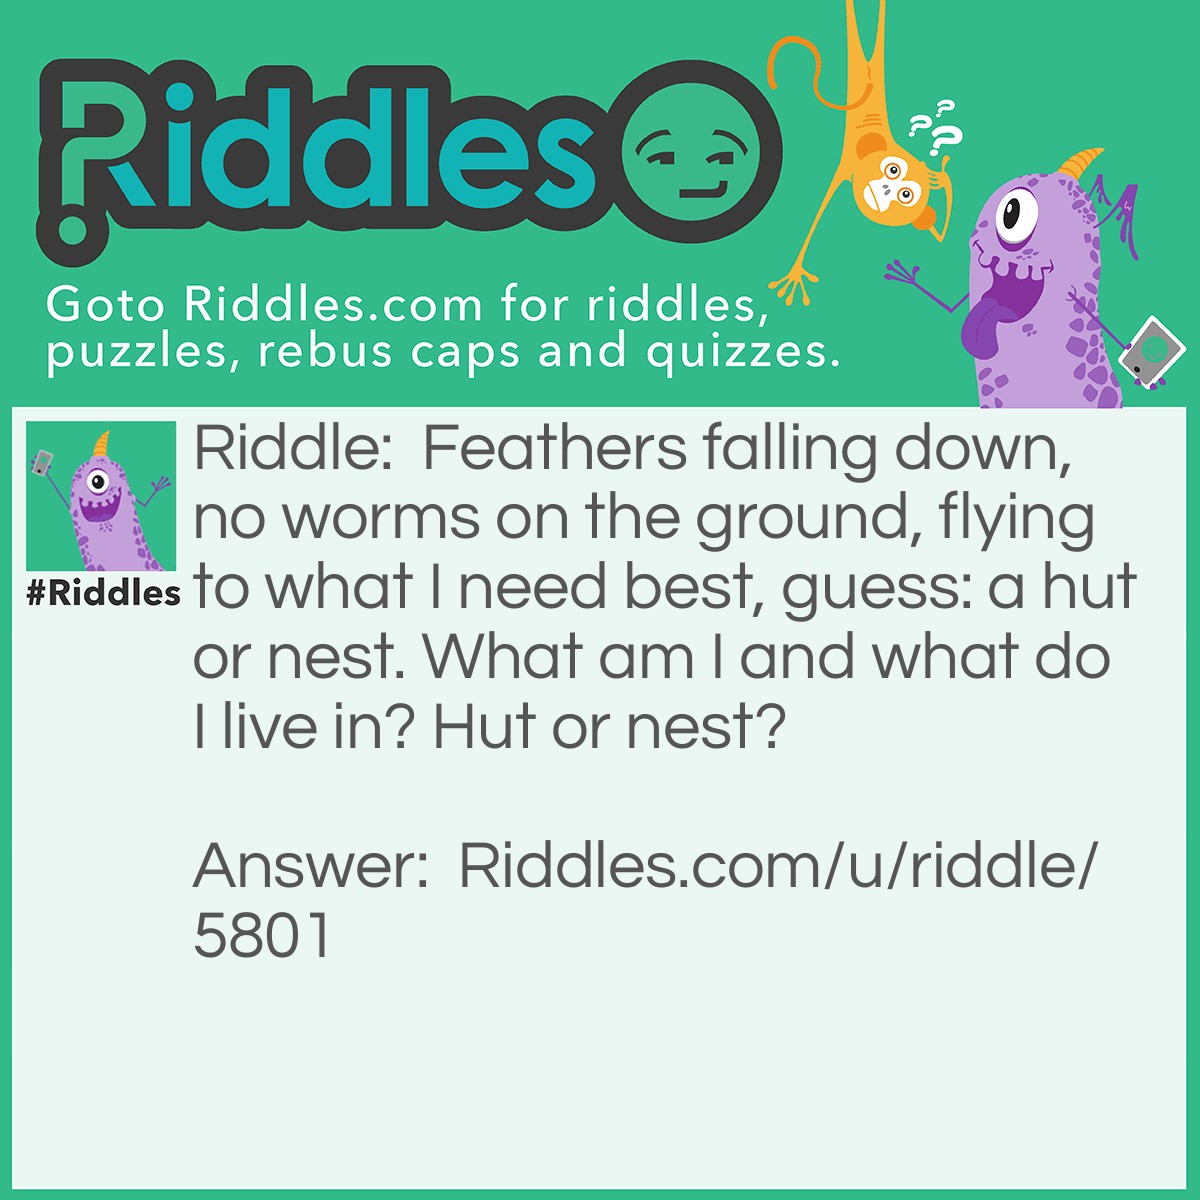 Riddle: Feathers falling down, no worms on the ground, flying to what I need best, guess: a hut or nest. What am I and what do I live in? Hut or nest? Answer: A bird lives in a nest.